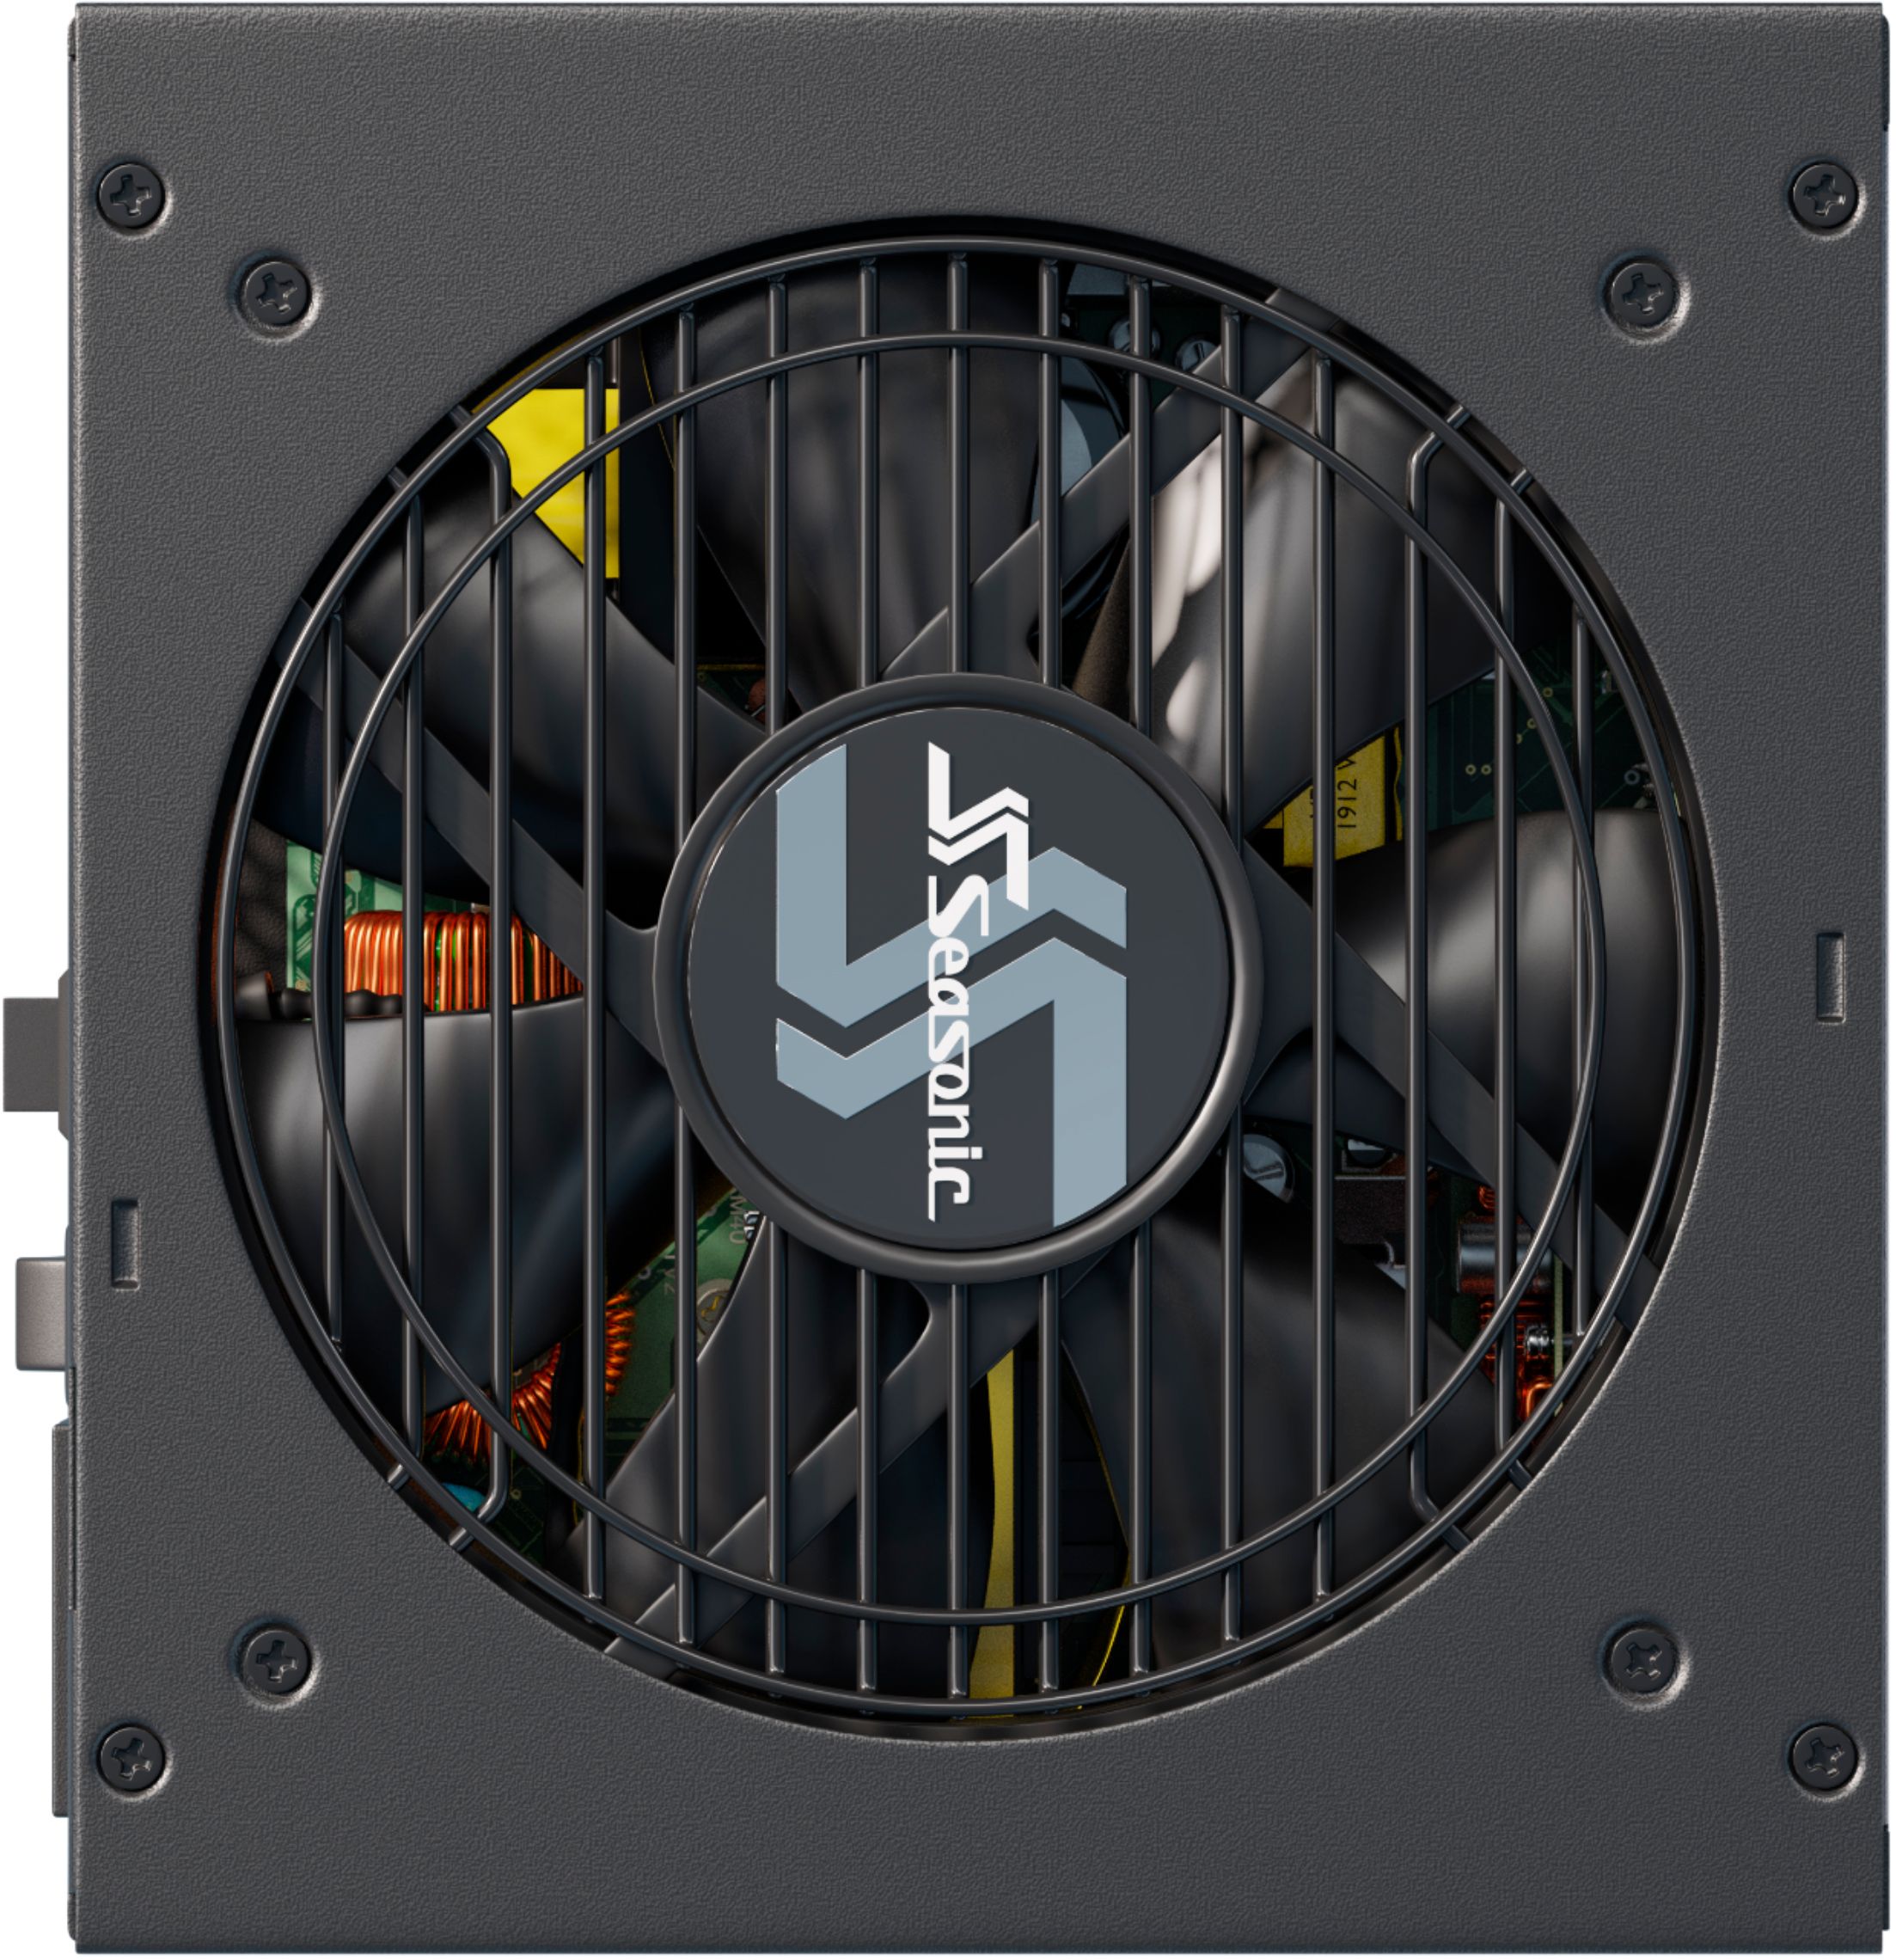 Seasonic VERTEX PX-850, 850W 80+ Platinum, ATX 3.0 / PCIe 5.0 Compliant,  Full Modular, Fan Control in Fanless, Silent, and Cooling Mode, PSU for  Gaming and High-Performance Systems, 12851PXAFS 